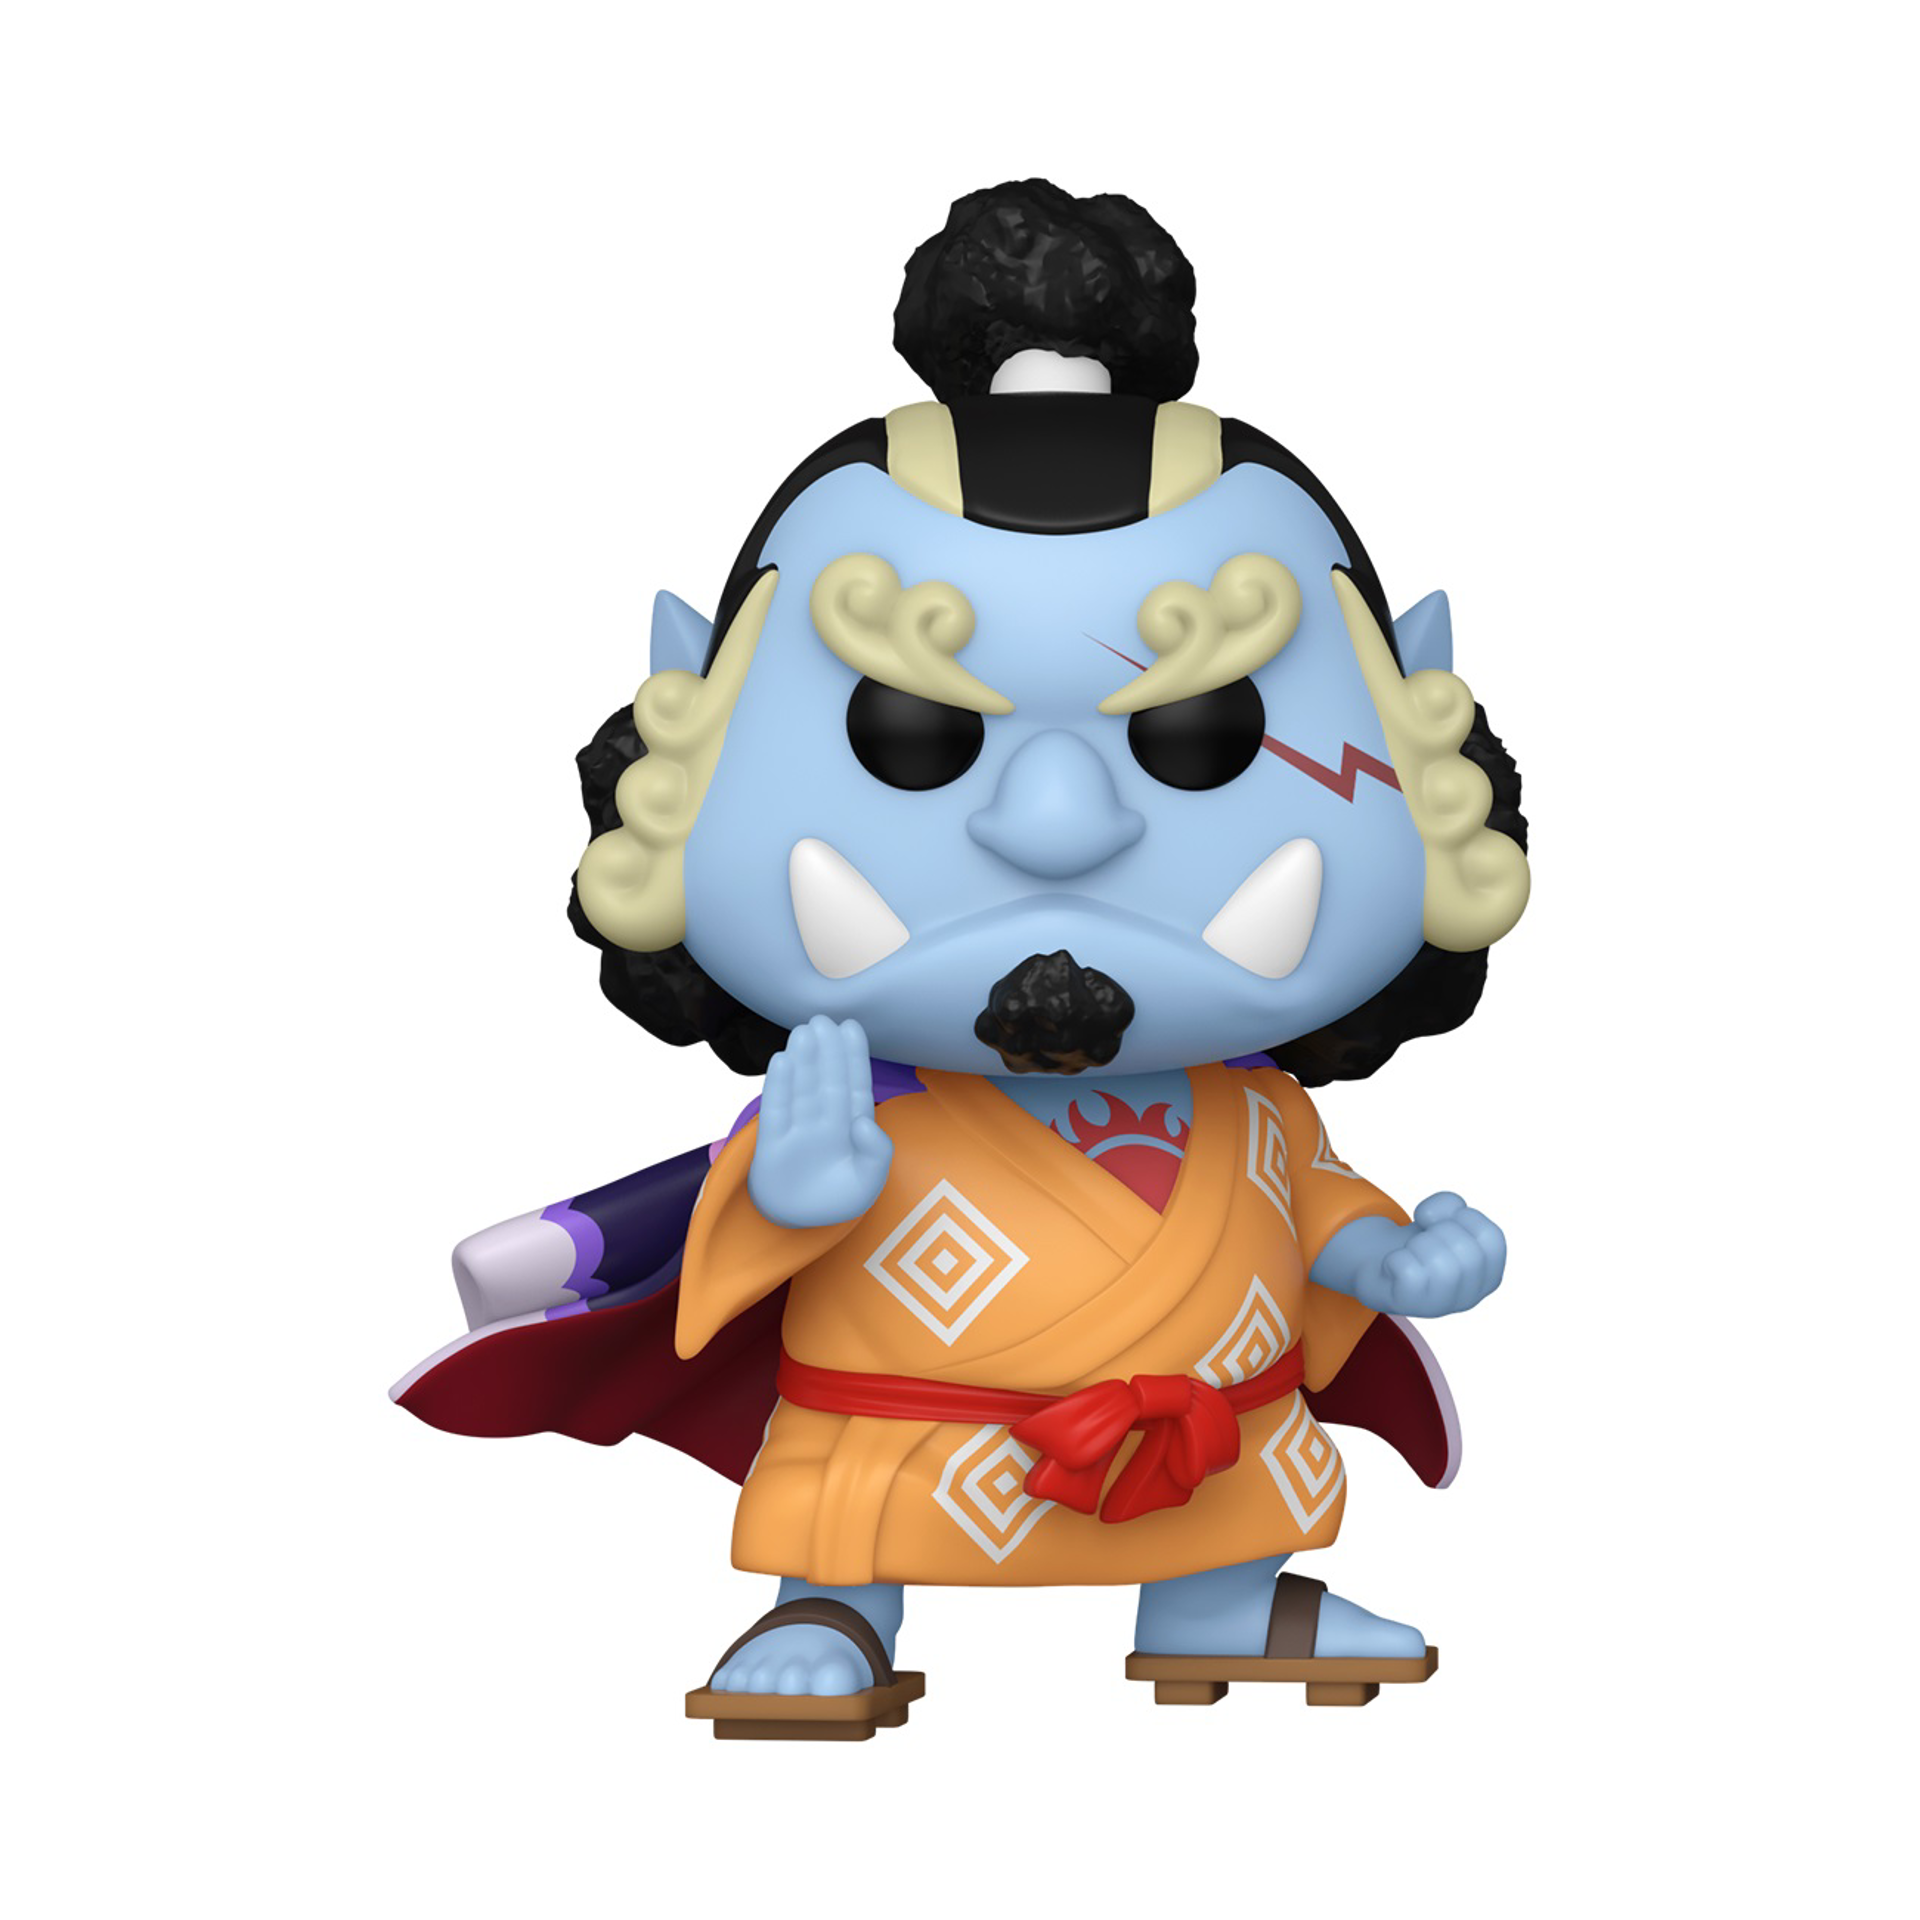 Funko Pop! Animation: One Piece - Jinbe (chance of special Chase edition)